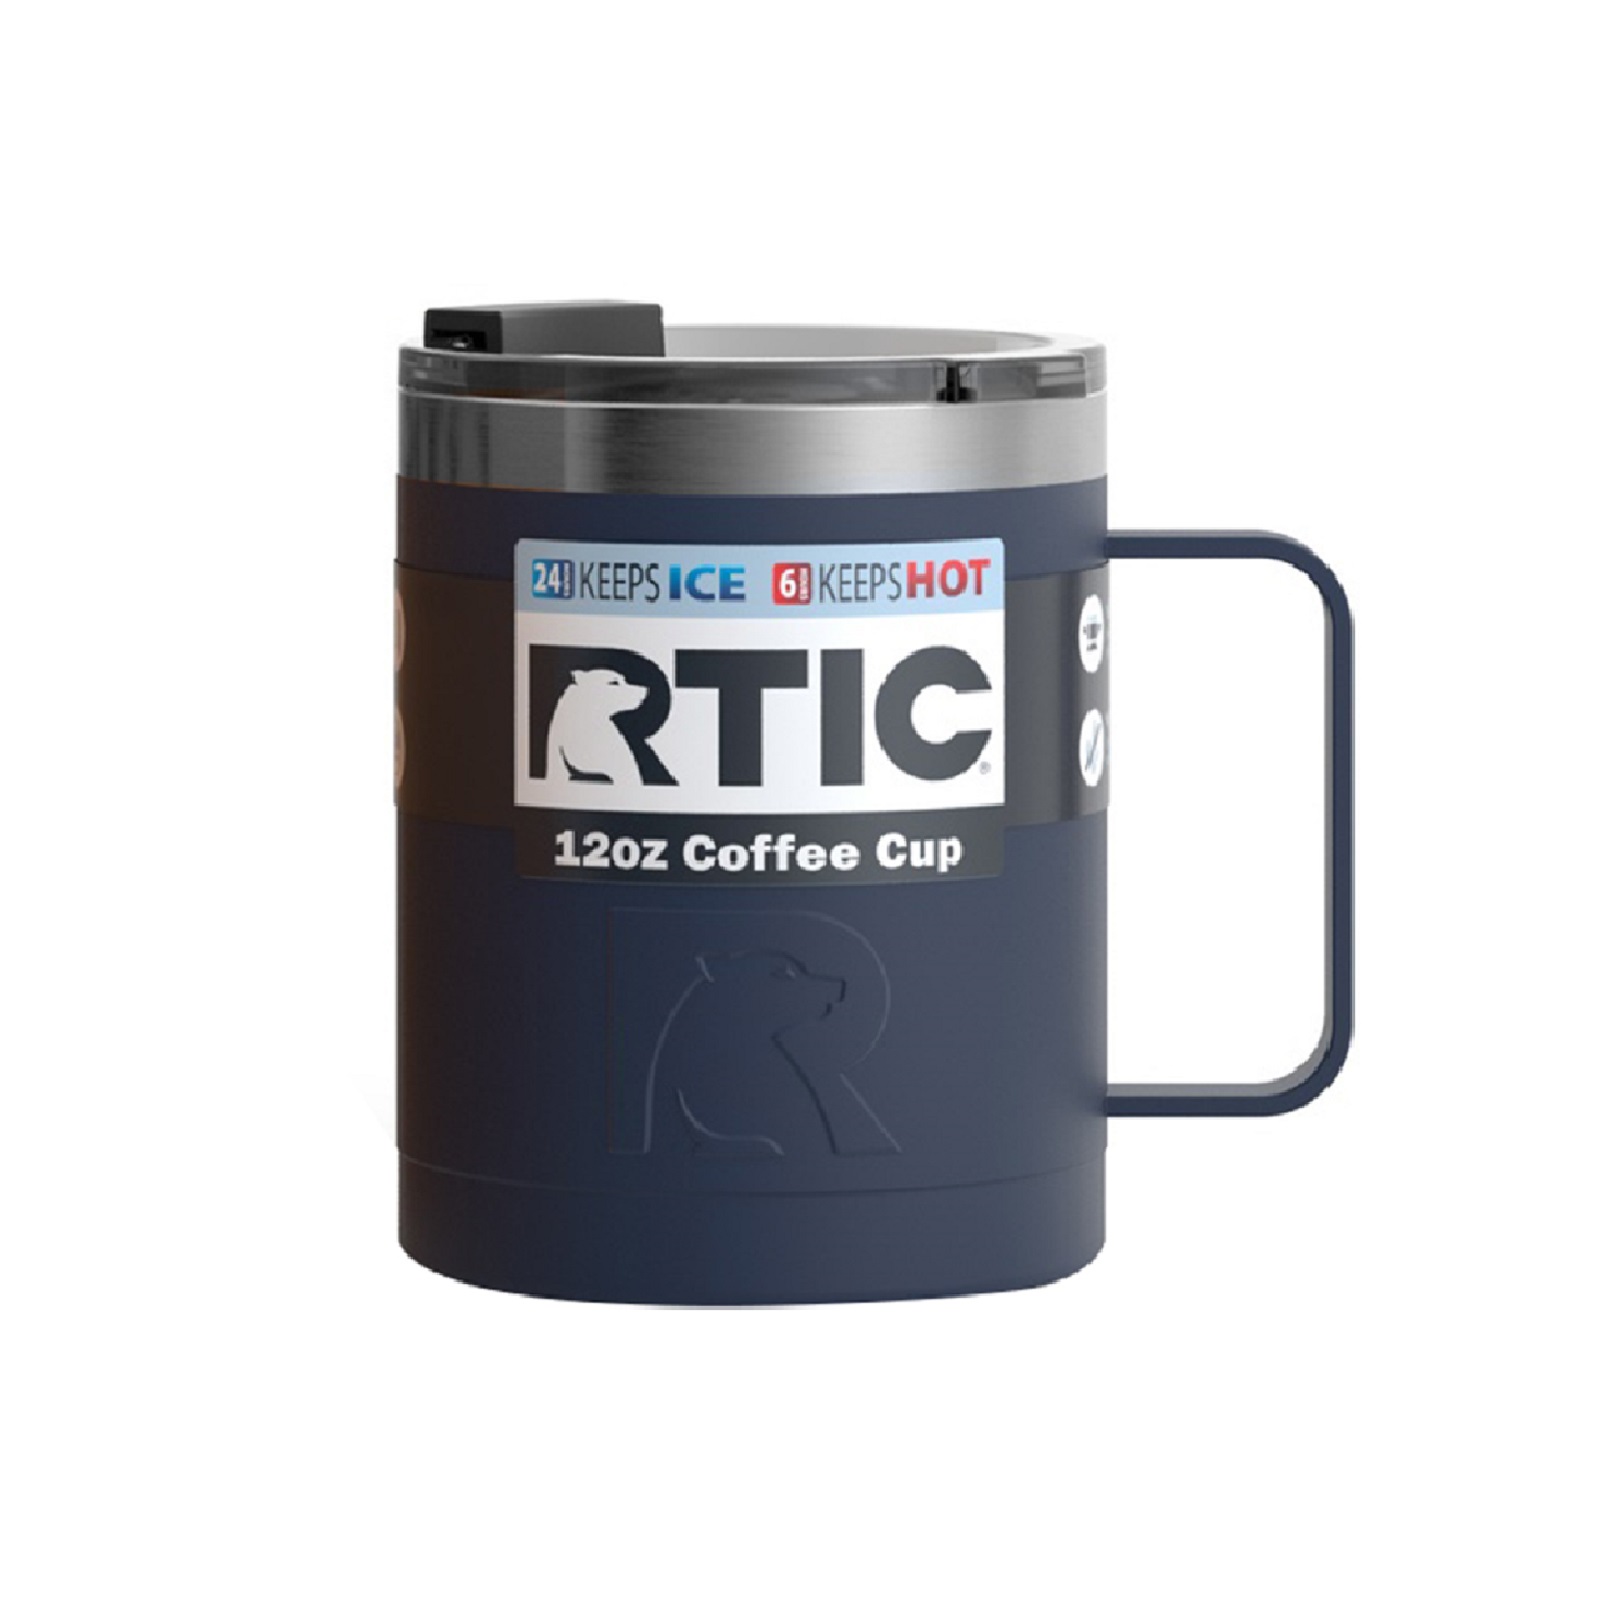 RTIC Coffee Cup Mug NEW Blue 12oz WIN WITH BLUE FRITO LAY Branded UNUSED  Sticker